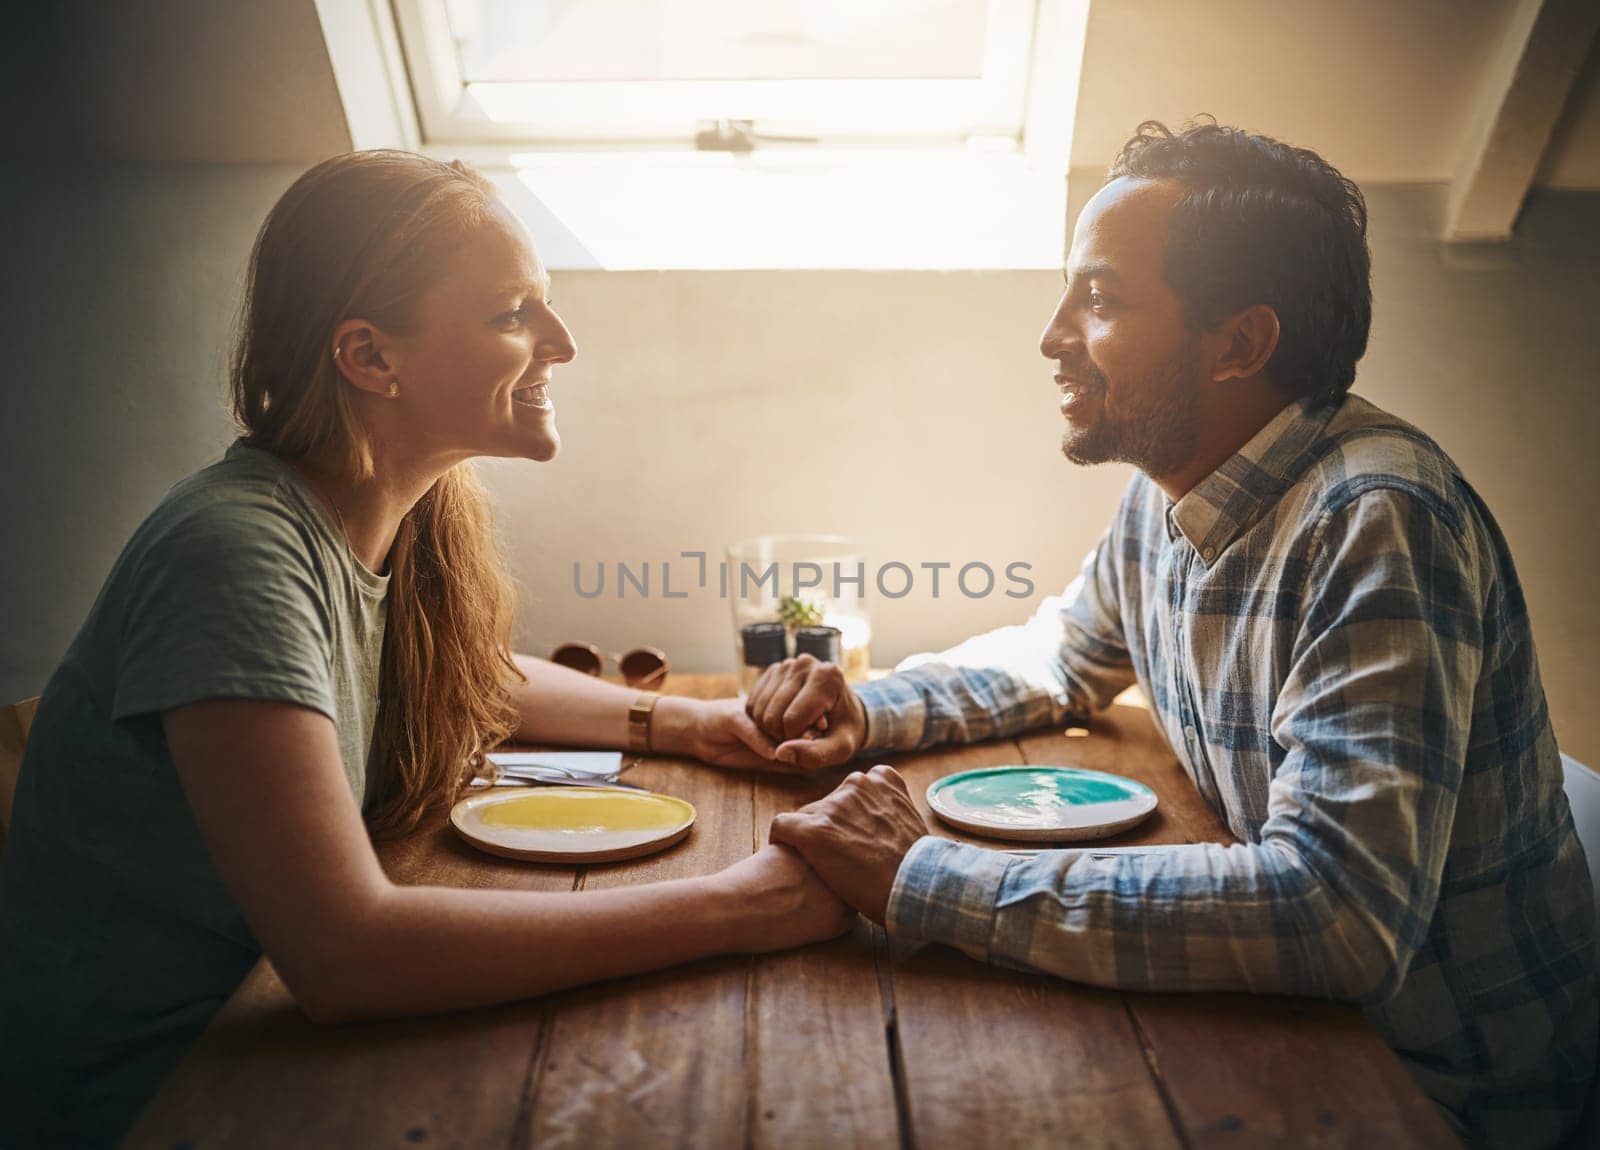 Love, couple and holding hands at cafe on table, talking and bonding together. Valentines day, romance diversity and affection of man and woman on date, having fun or enjoying time in restaurant